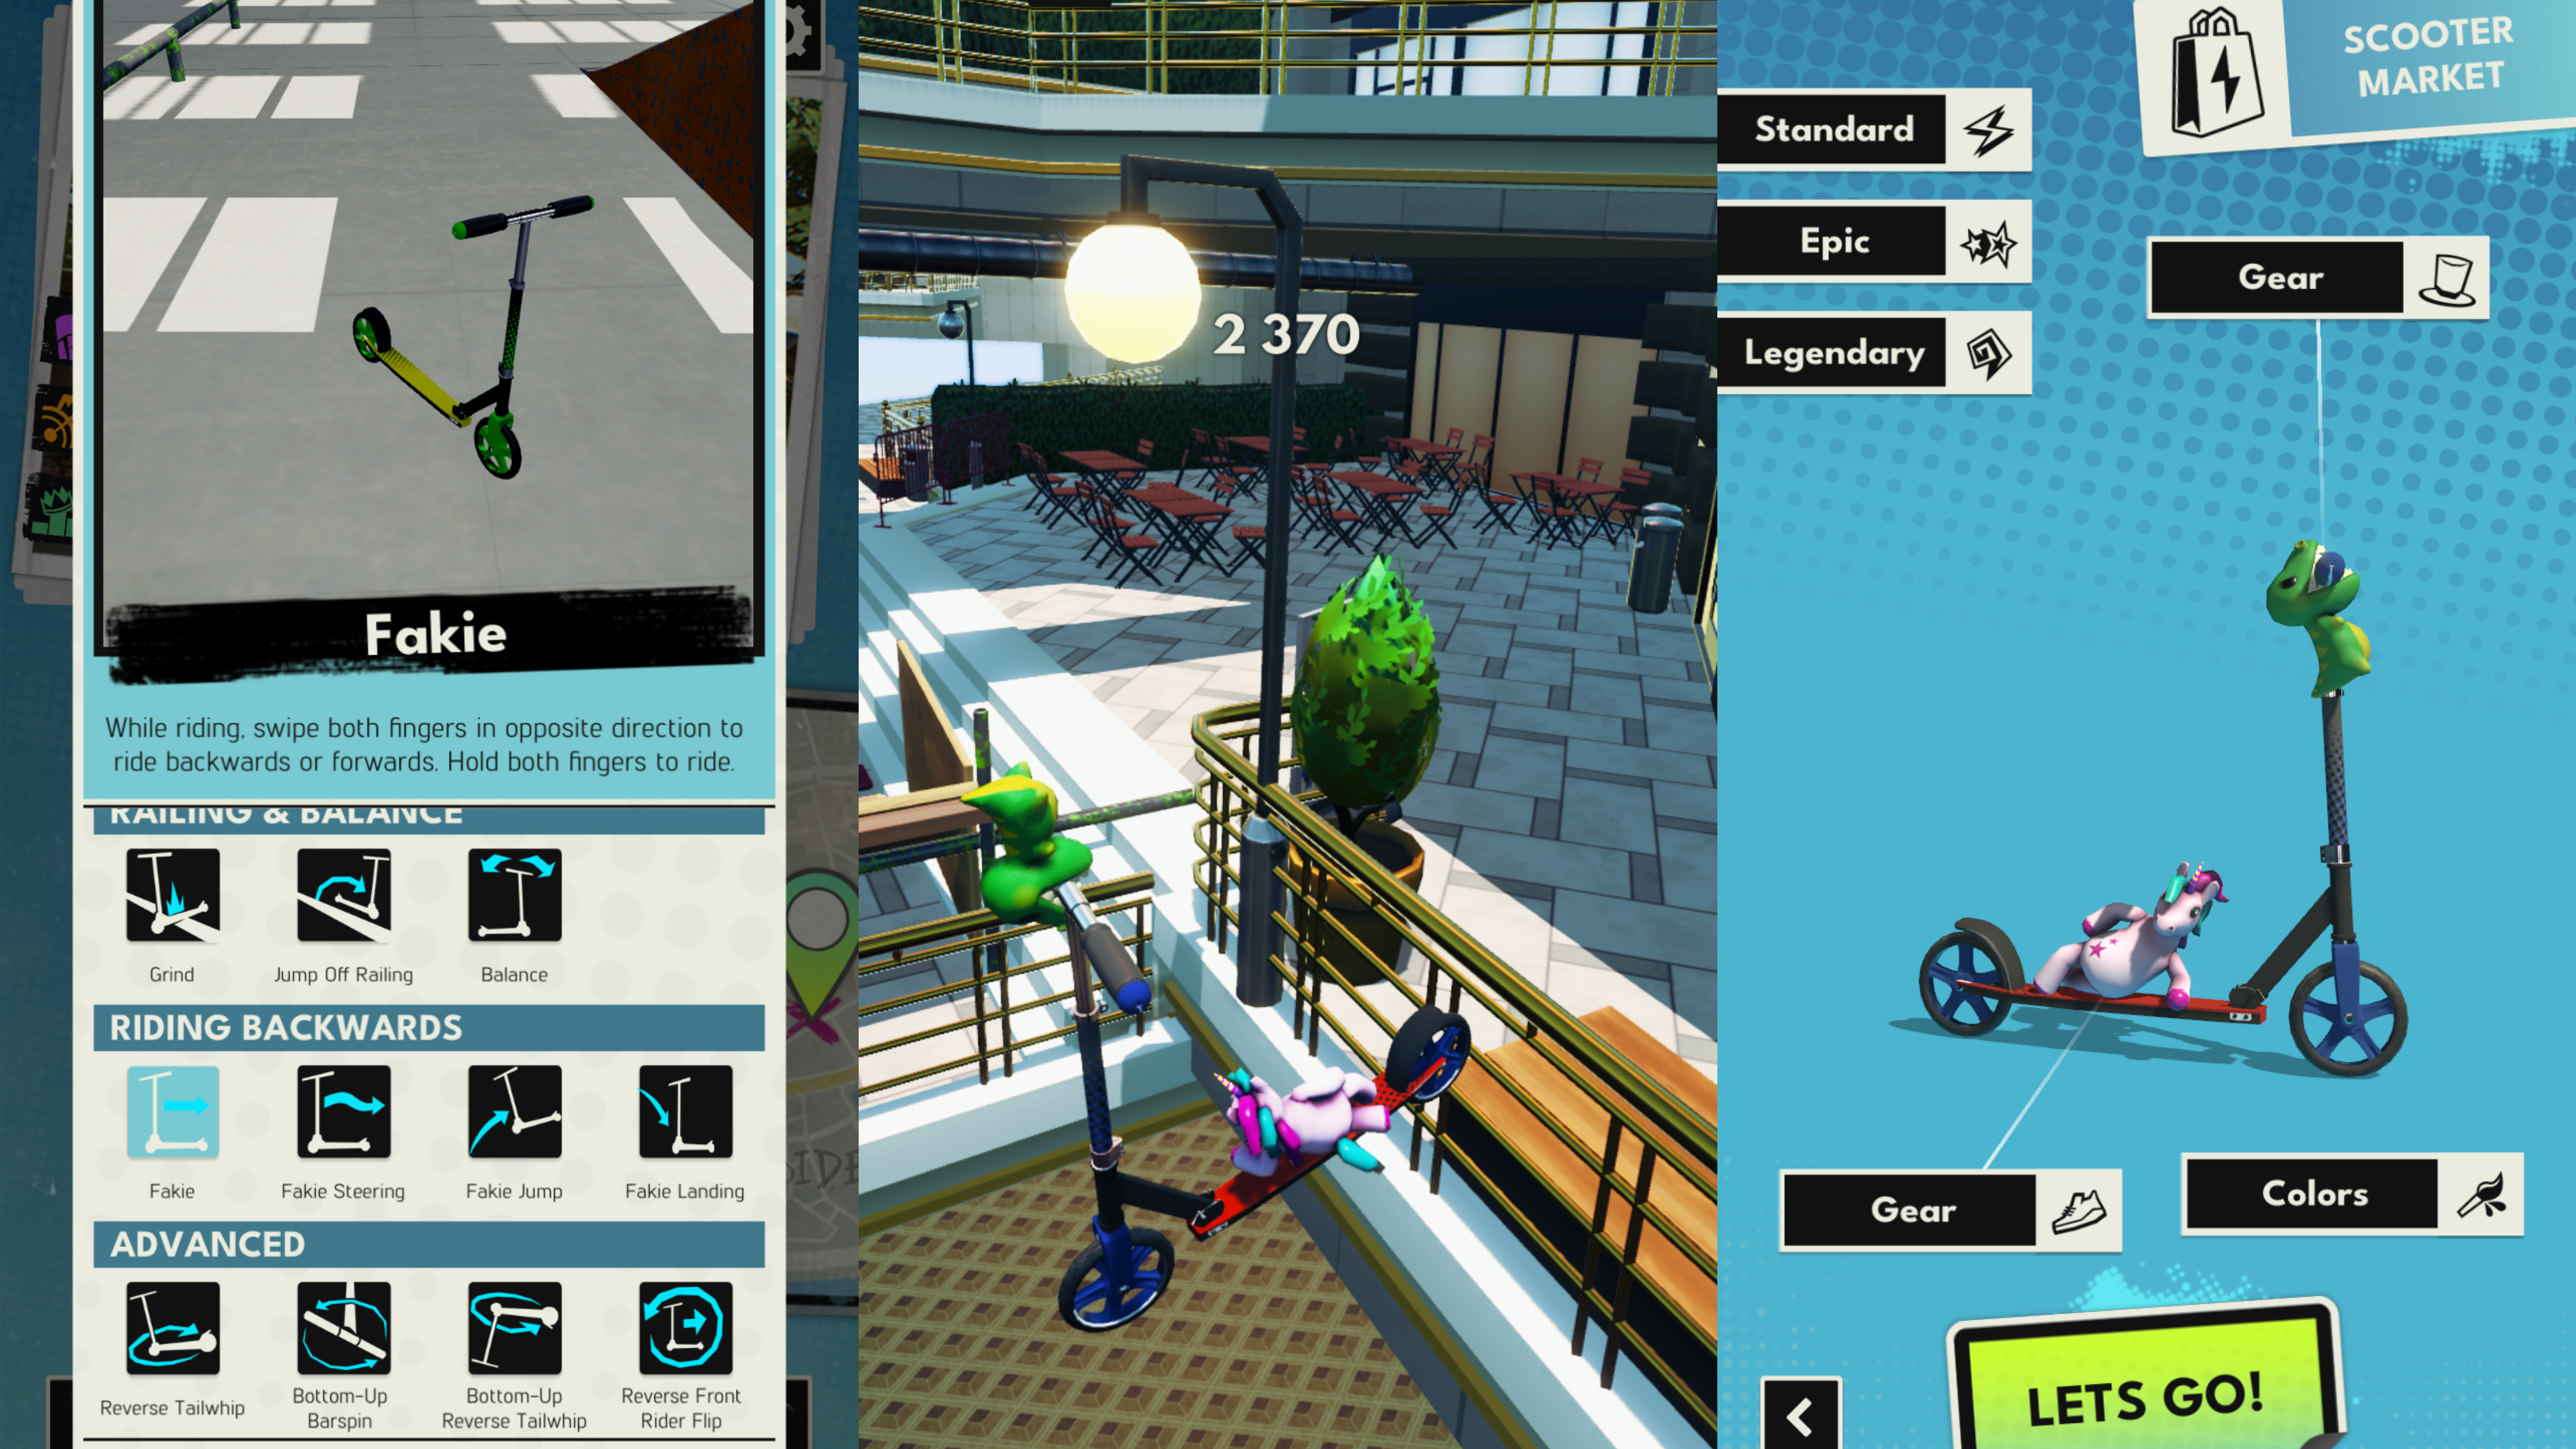 Screenshots showing Touchgrind Scooter